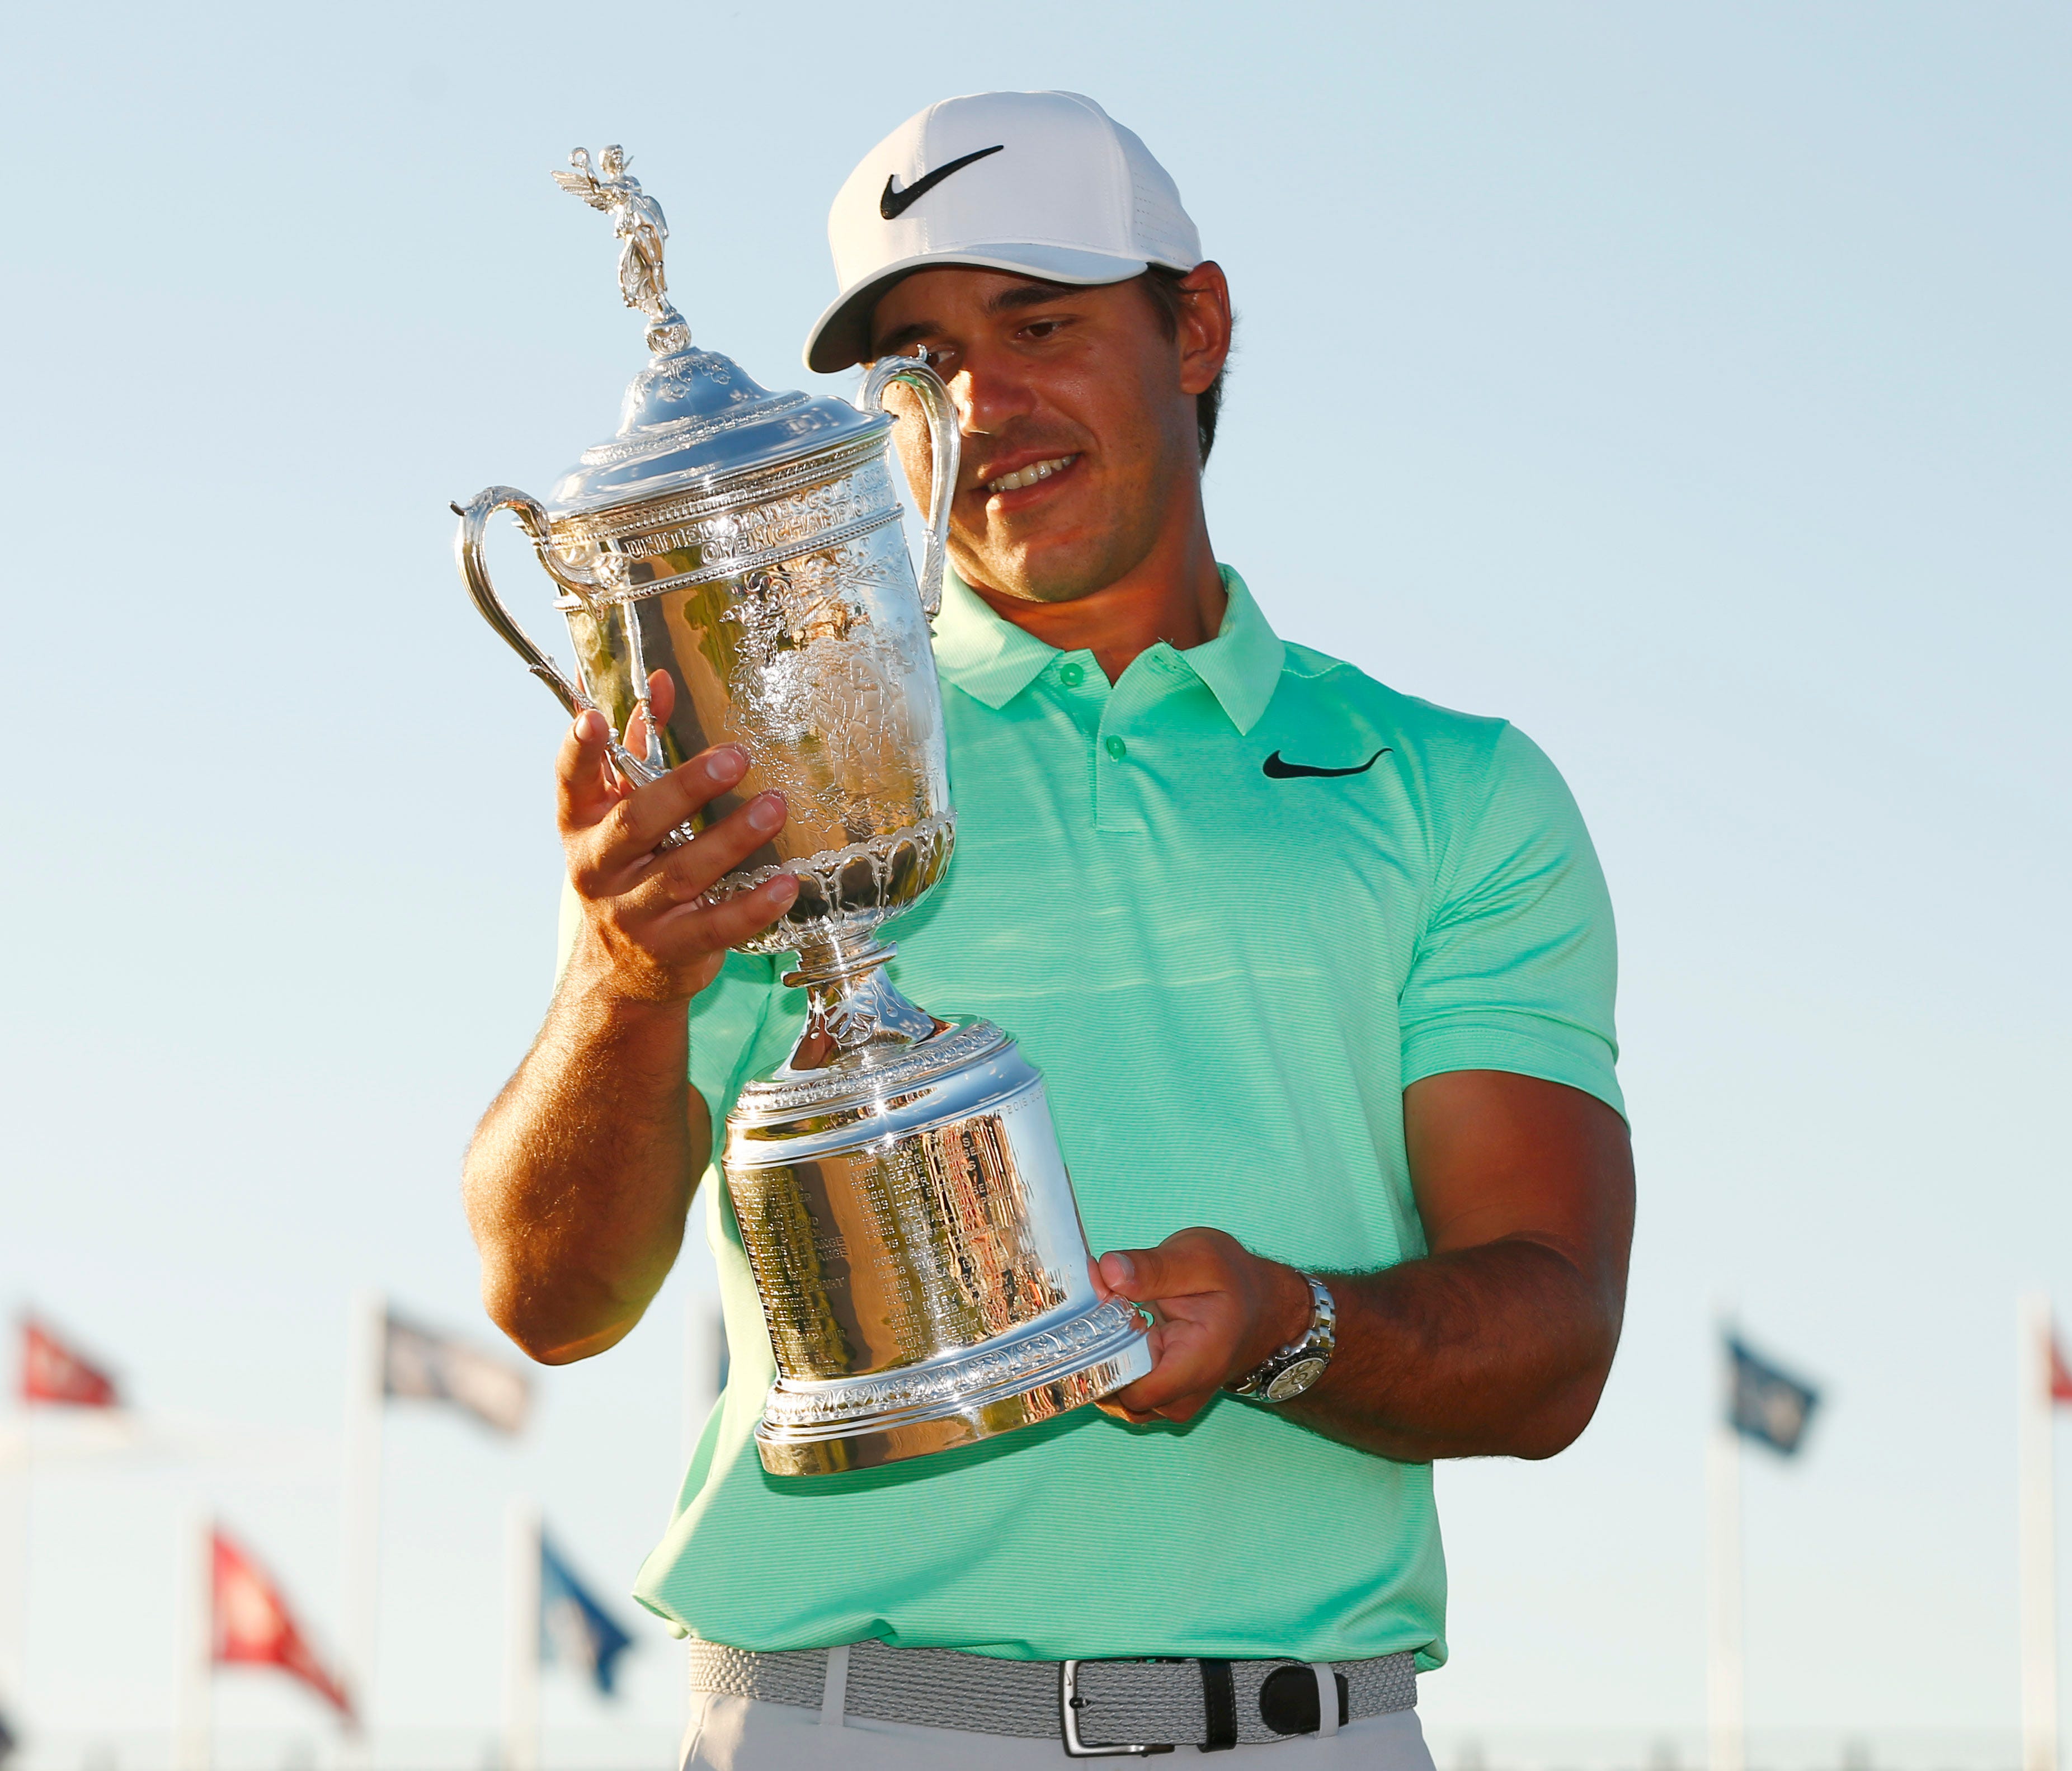 Brooks Koepka poses with the trophy after winning the U.S. Open at Erin Hills.